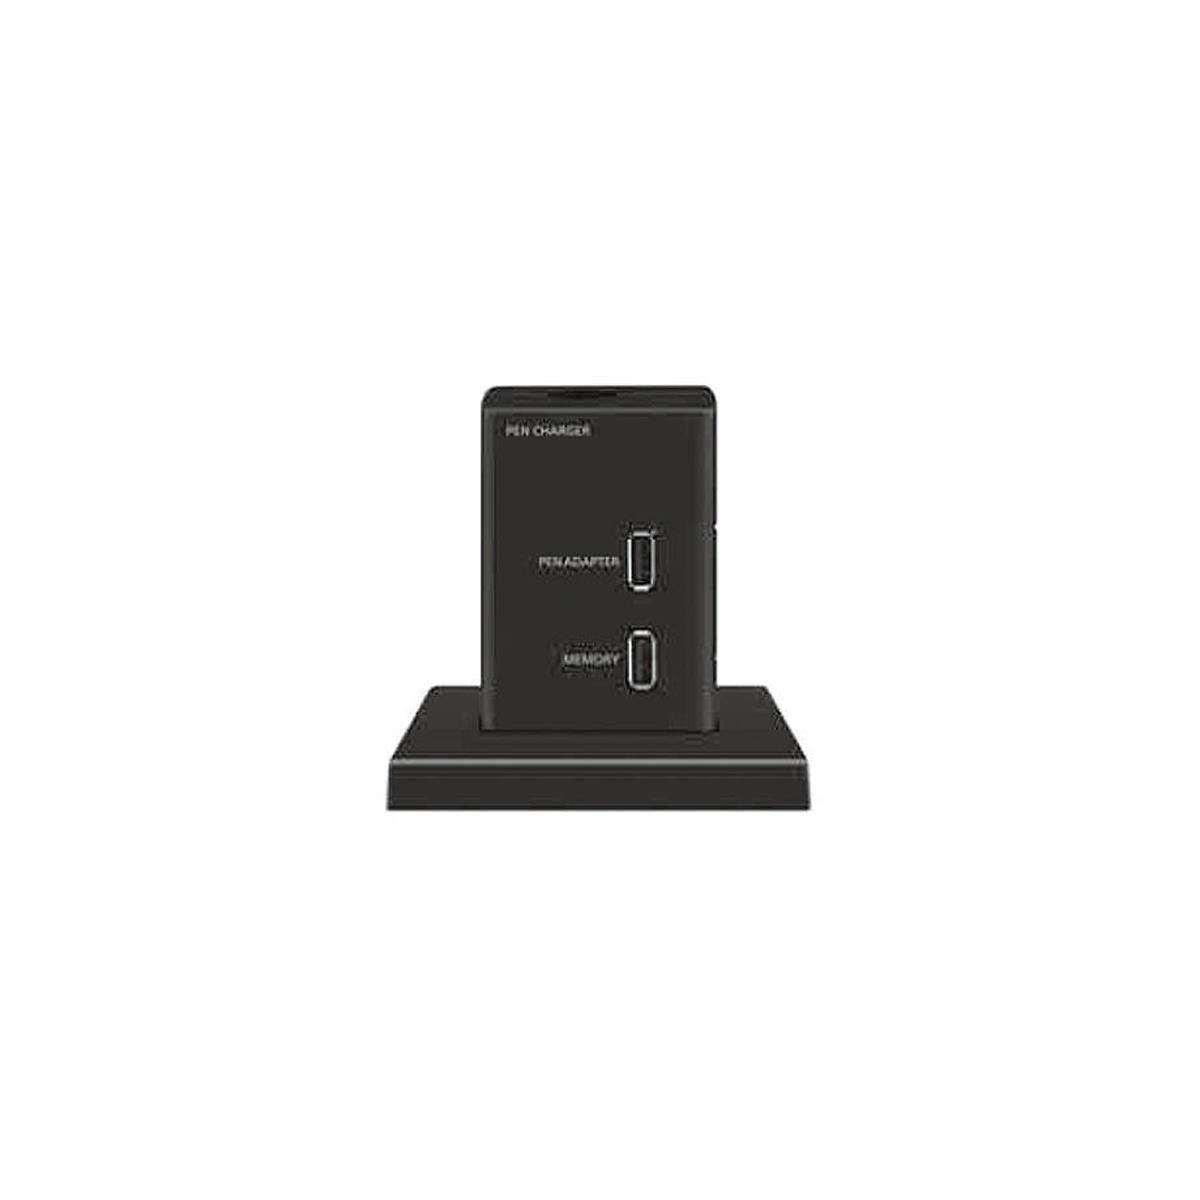 Image of Panasonic Charger for TY-TPEN2 Electronic Pen